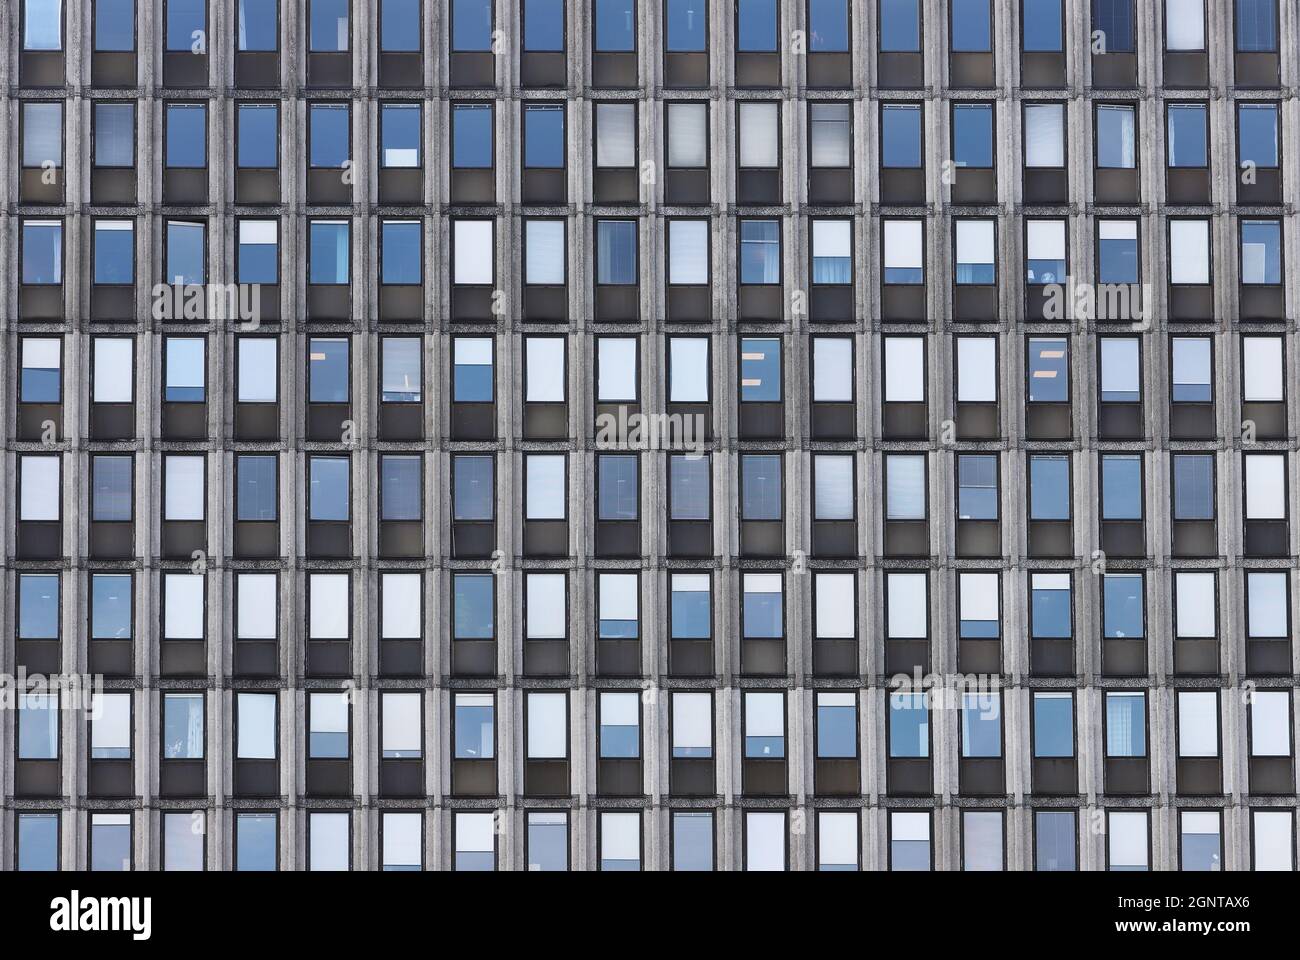 Full frame view of an office building facade with a pattern of windows. Stock Photo